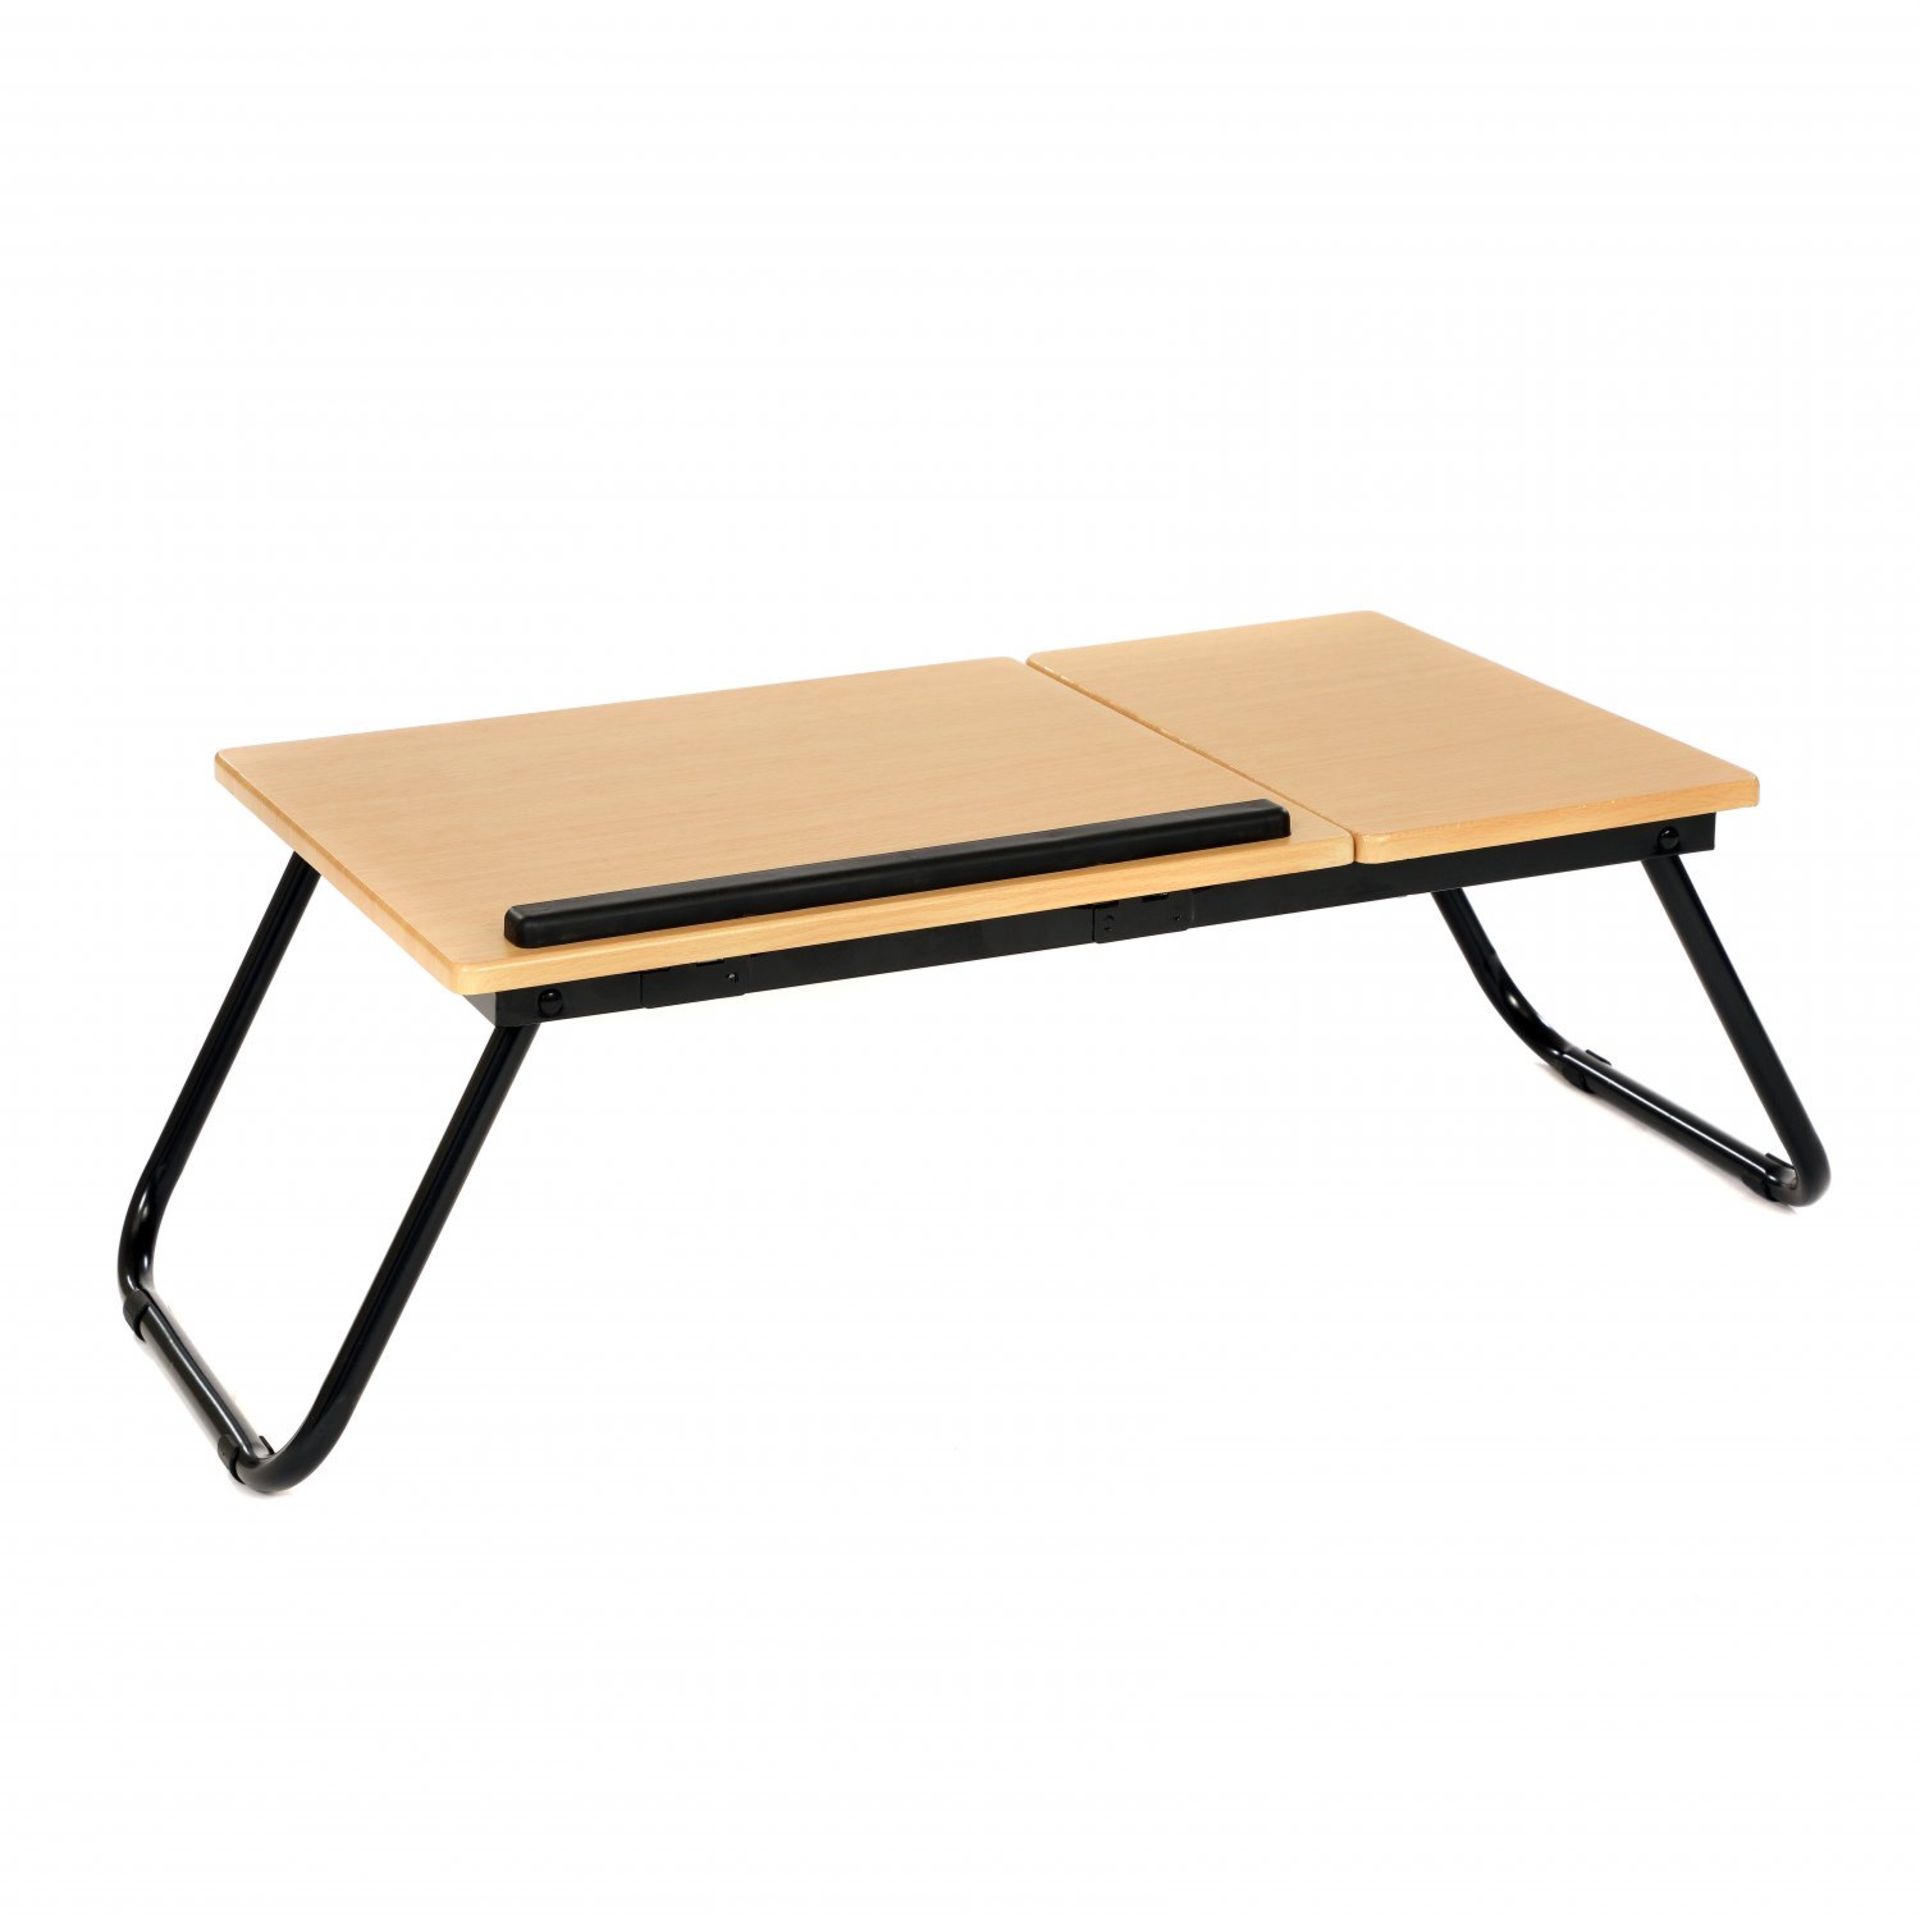 (EE477) Portable Folding Laptop Notepad Tablet Computer Table Desk Stand The folding table... - Image 2 of 2